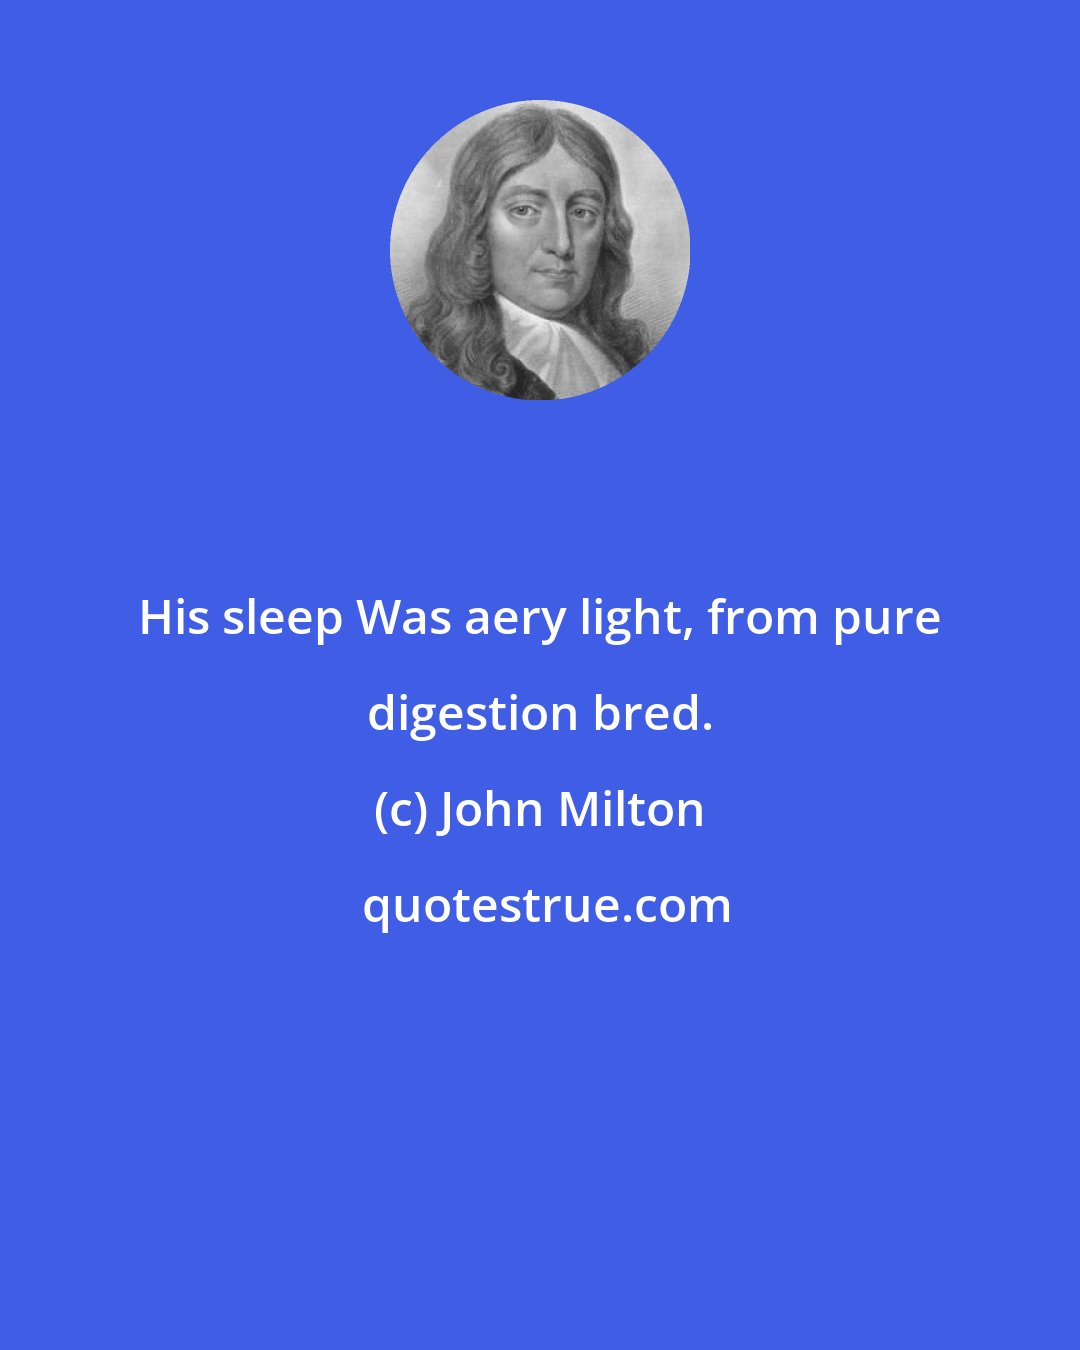 John Milton: His sleep Was aery light, from pure digestion bred.